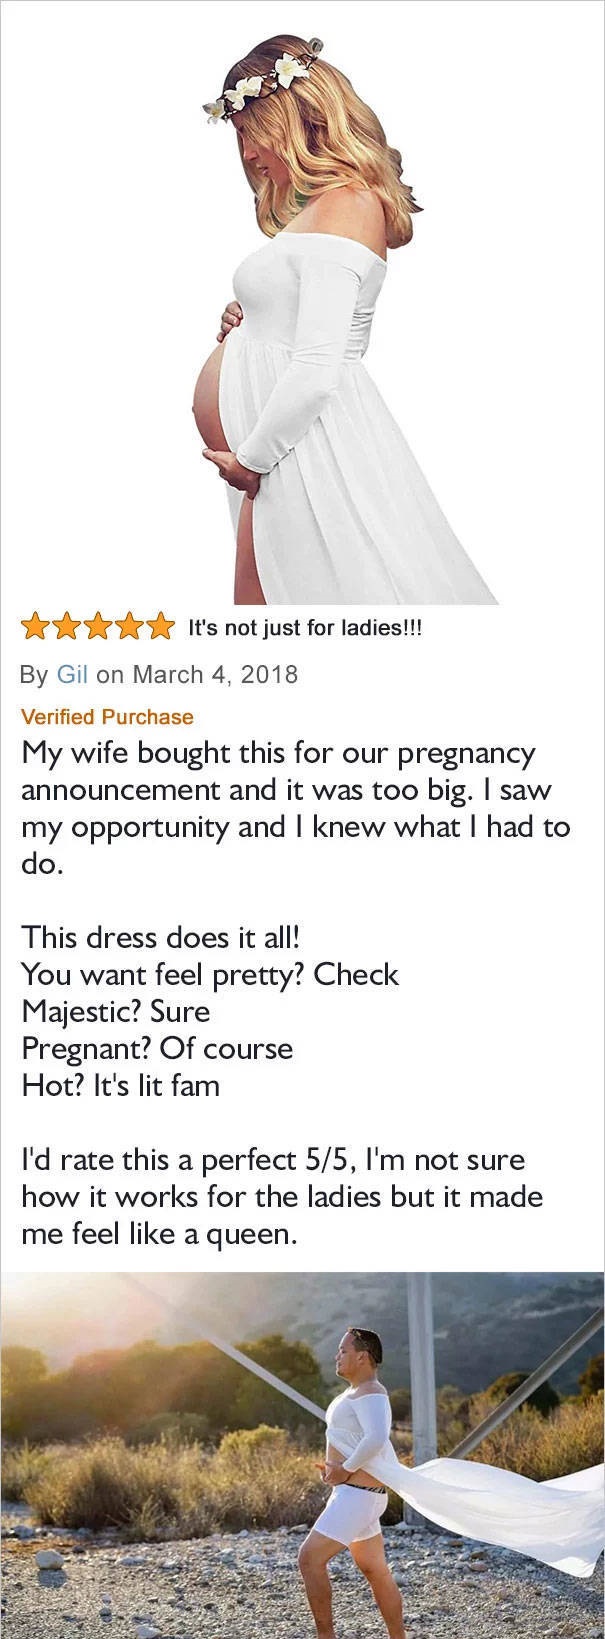 amazon reviews - funny reviews on amazon - It's not just for ladies!!! By Gil on Verified Purchase My wife bought this for our pregnancy announcement and it was too big. I saw my opportunity and I knew what I had to do. This dress does it all! You want fe